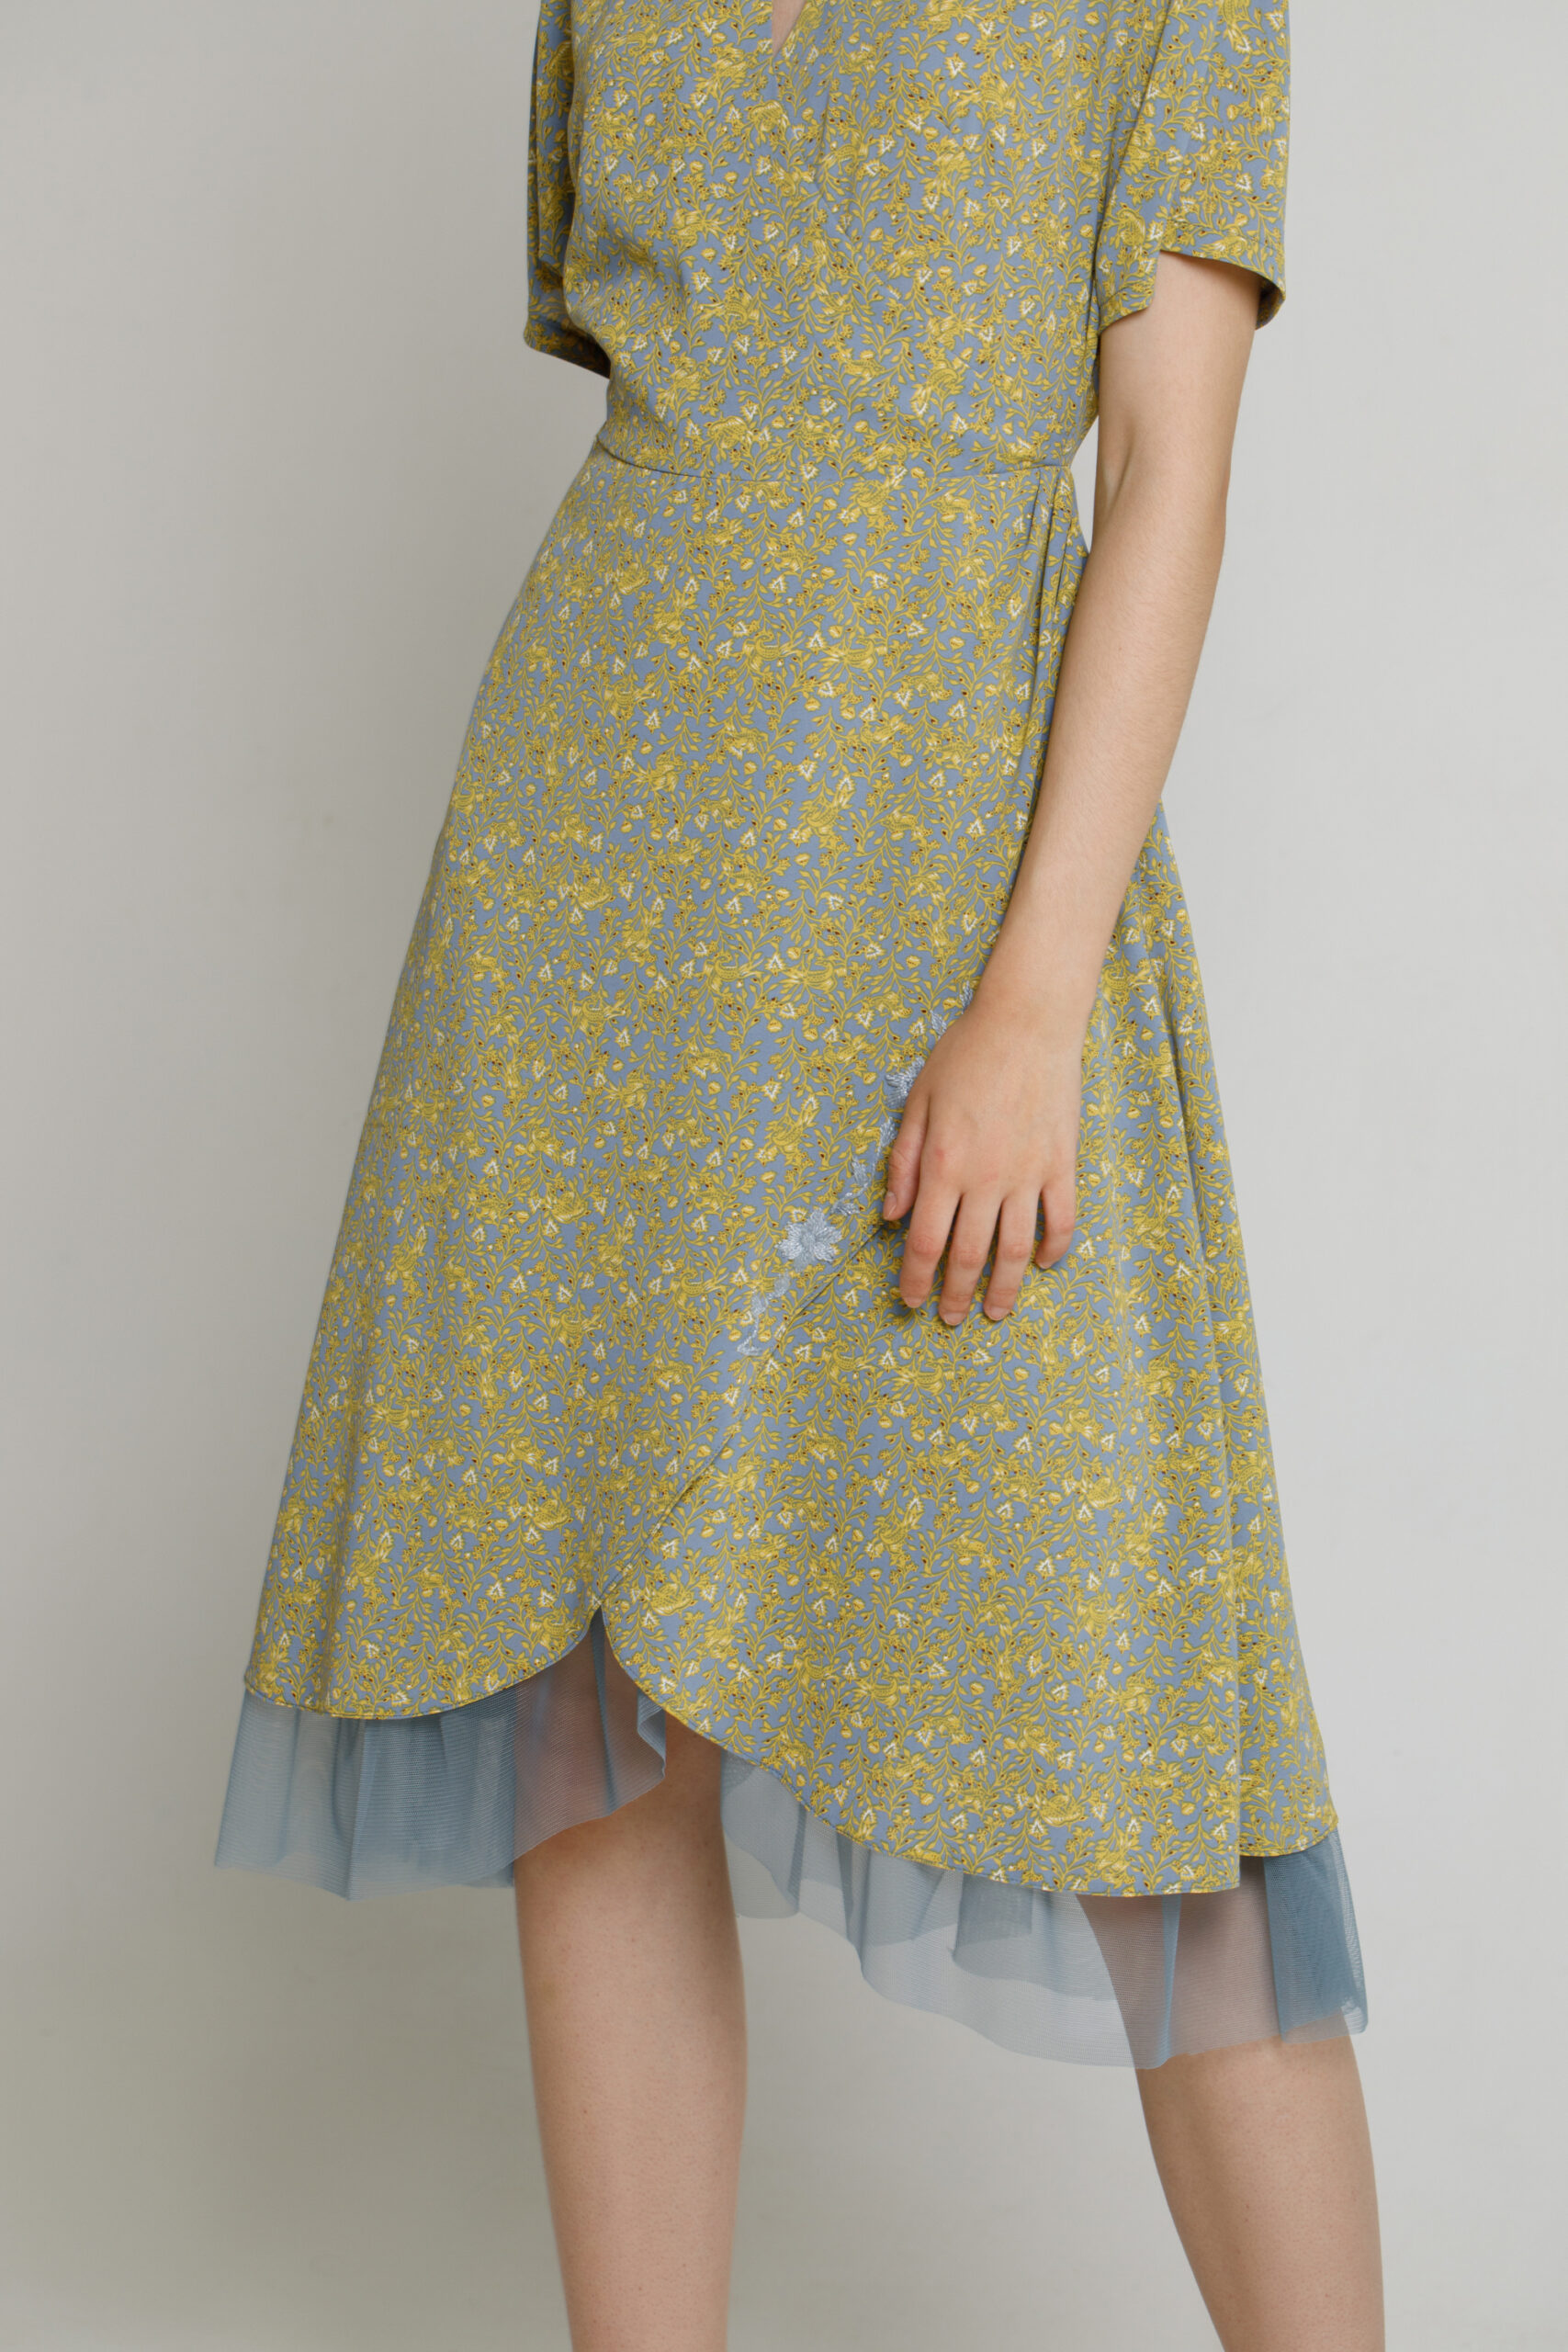 TASIA casual dress with ruffle in blue tulle. Natural fabrics, original design, handmade embroidery